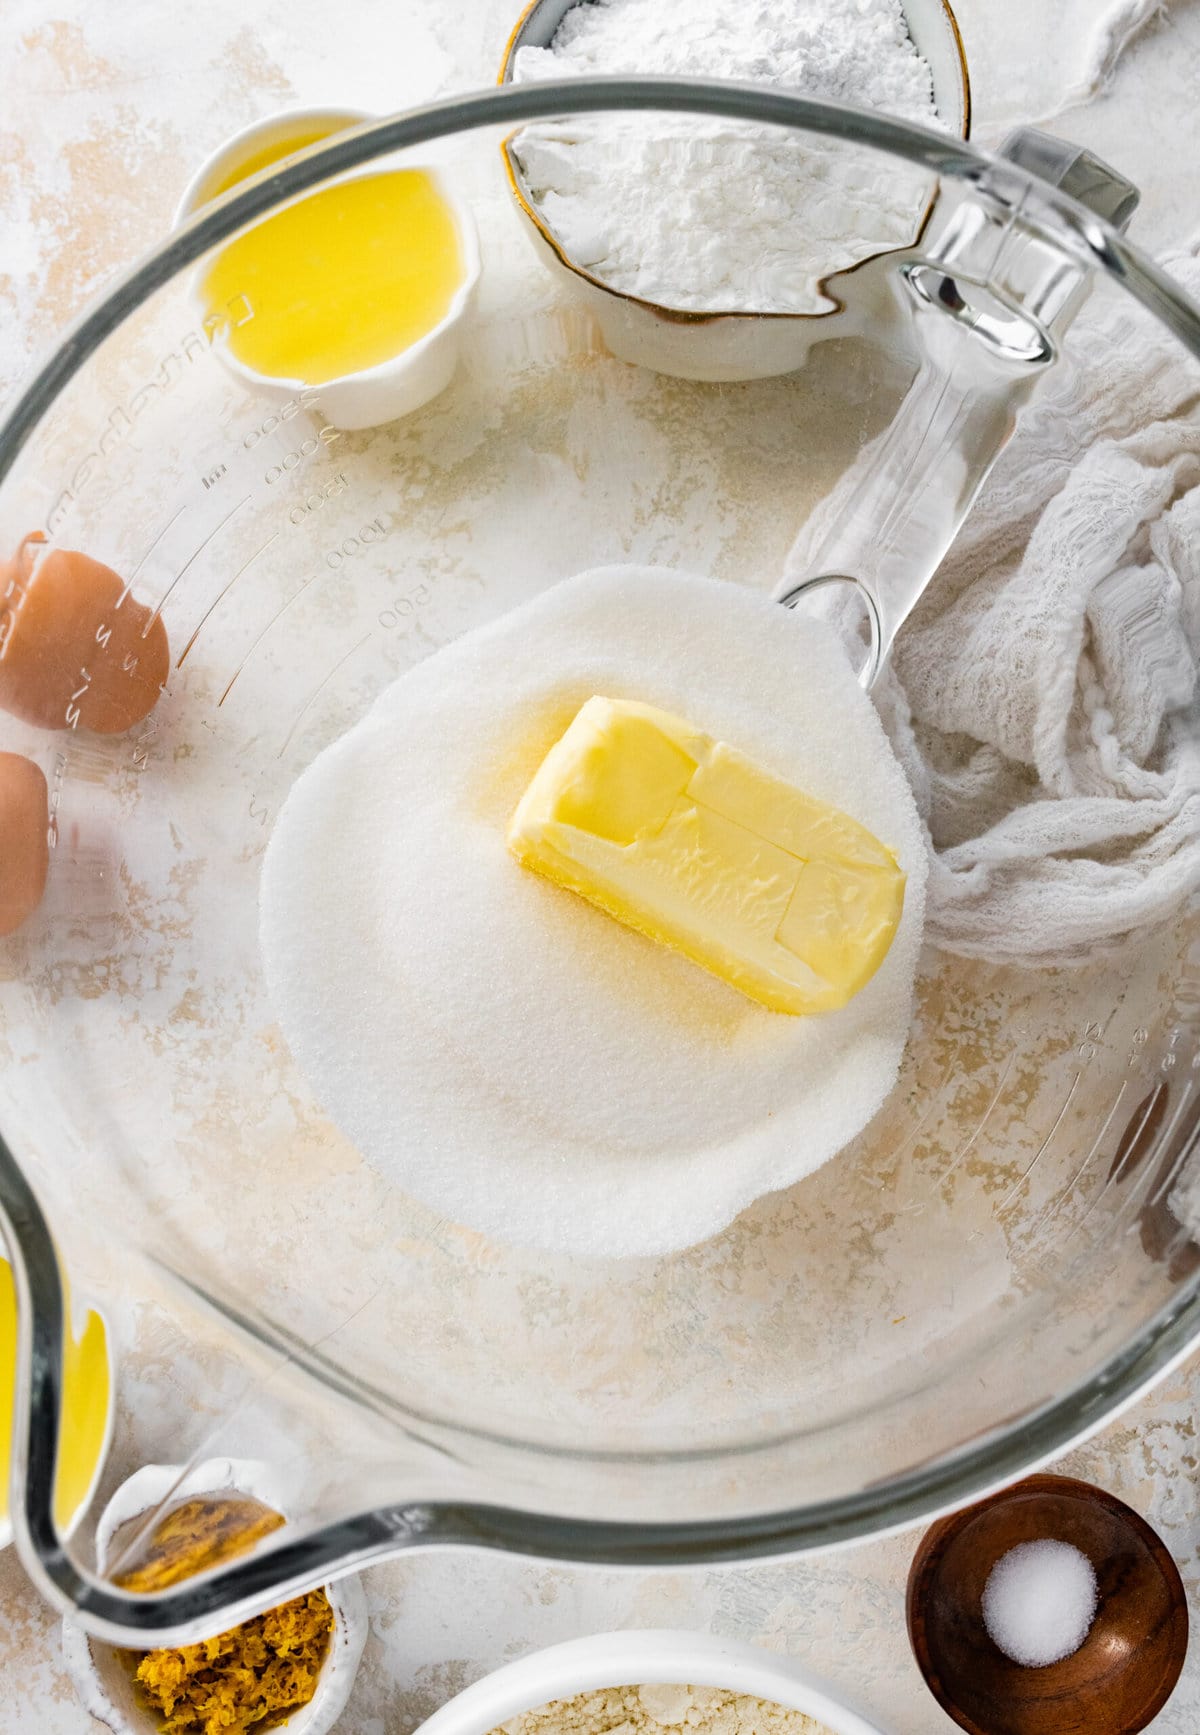 How to make Best Lemon Biscotti Recipe Step-by-Step: mixing butter and sugar in a mixing bowl.